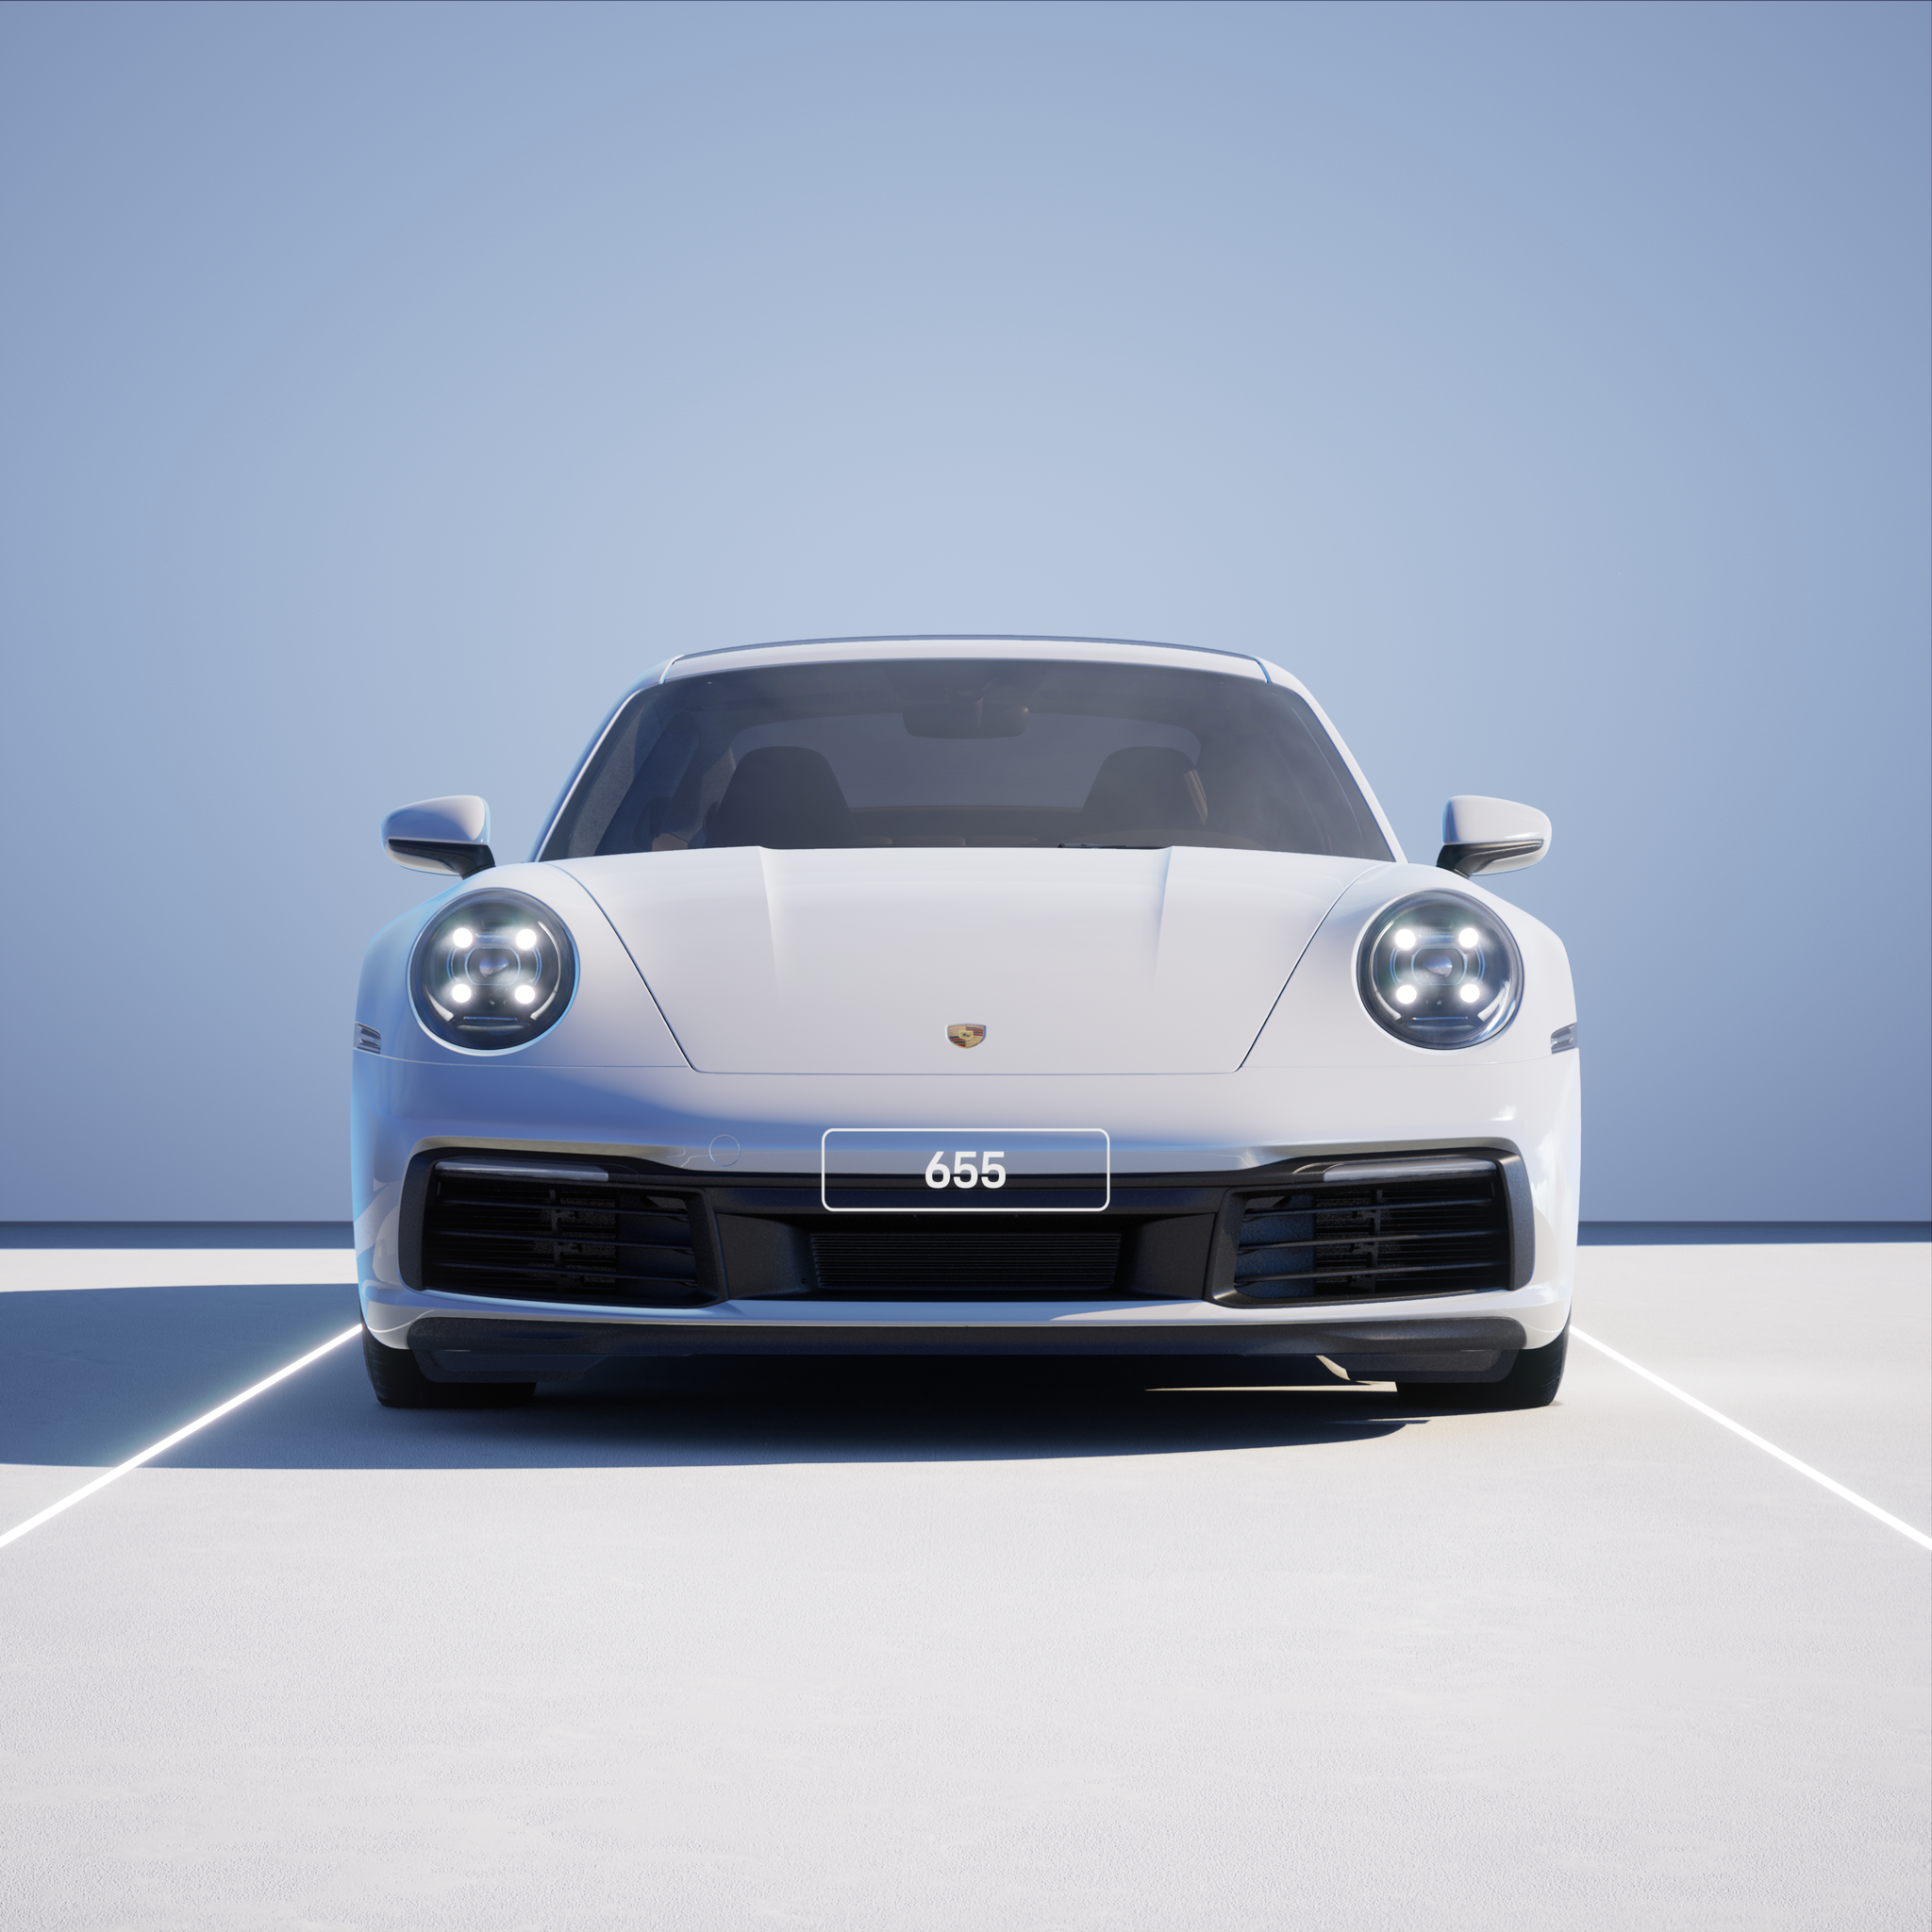 The PORSCHΞ 911 655 image in phase